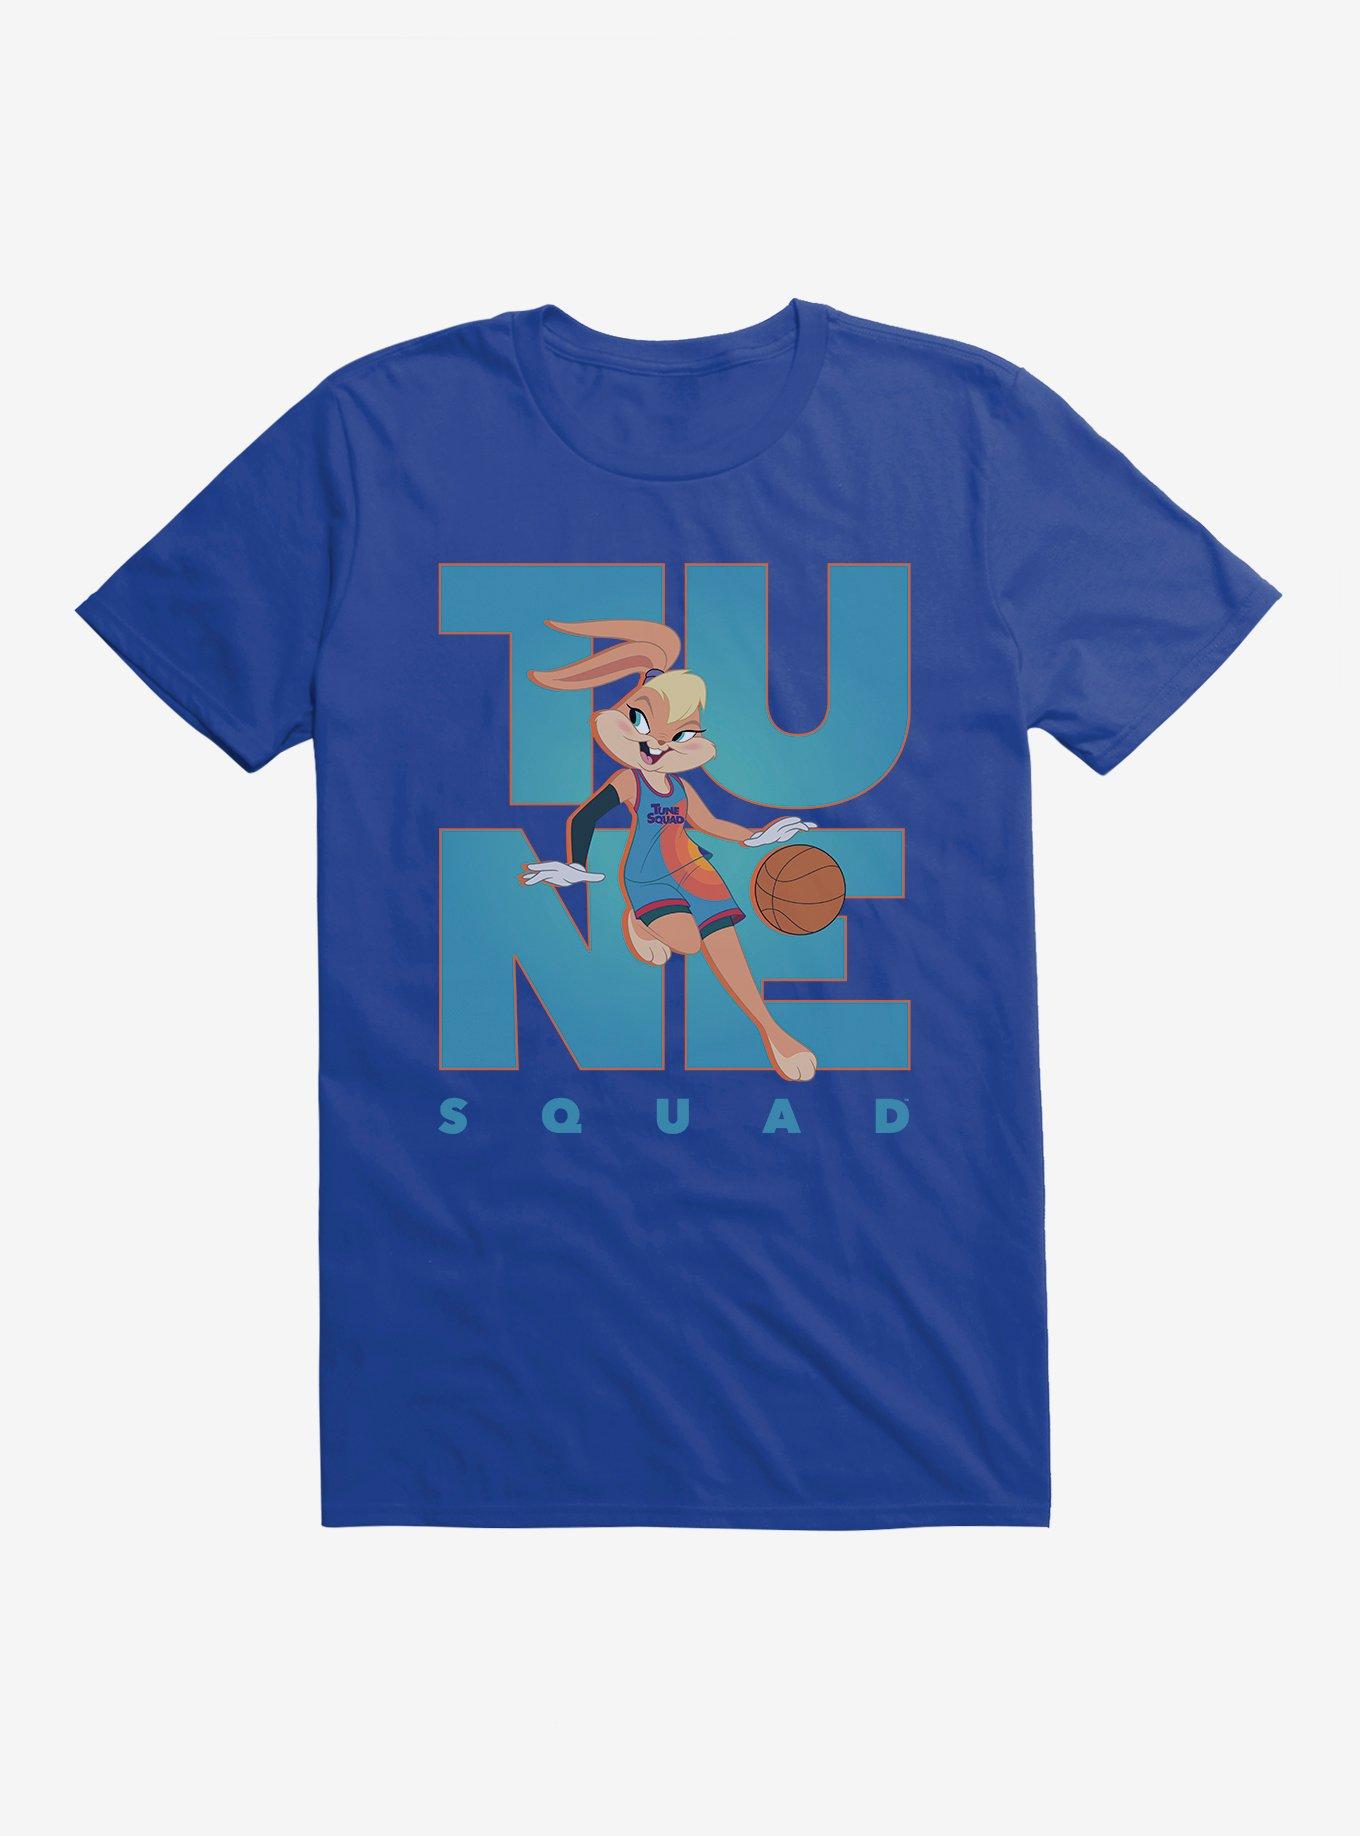 Space Jam: A New Legacy Dribble Lola Bunny Tune Squad T-Shirt, , hi-res